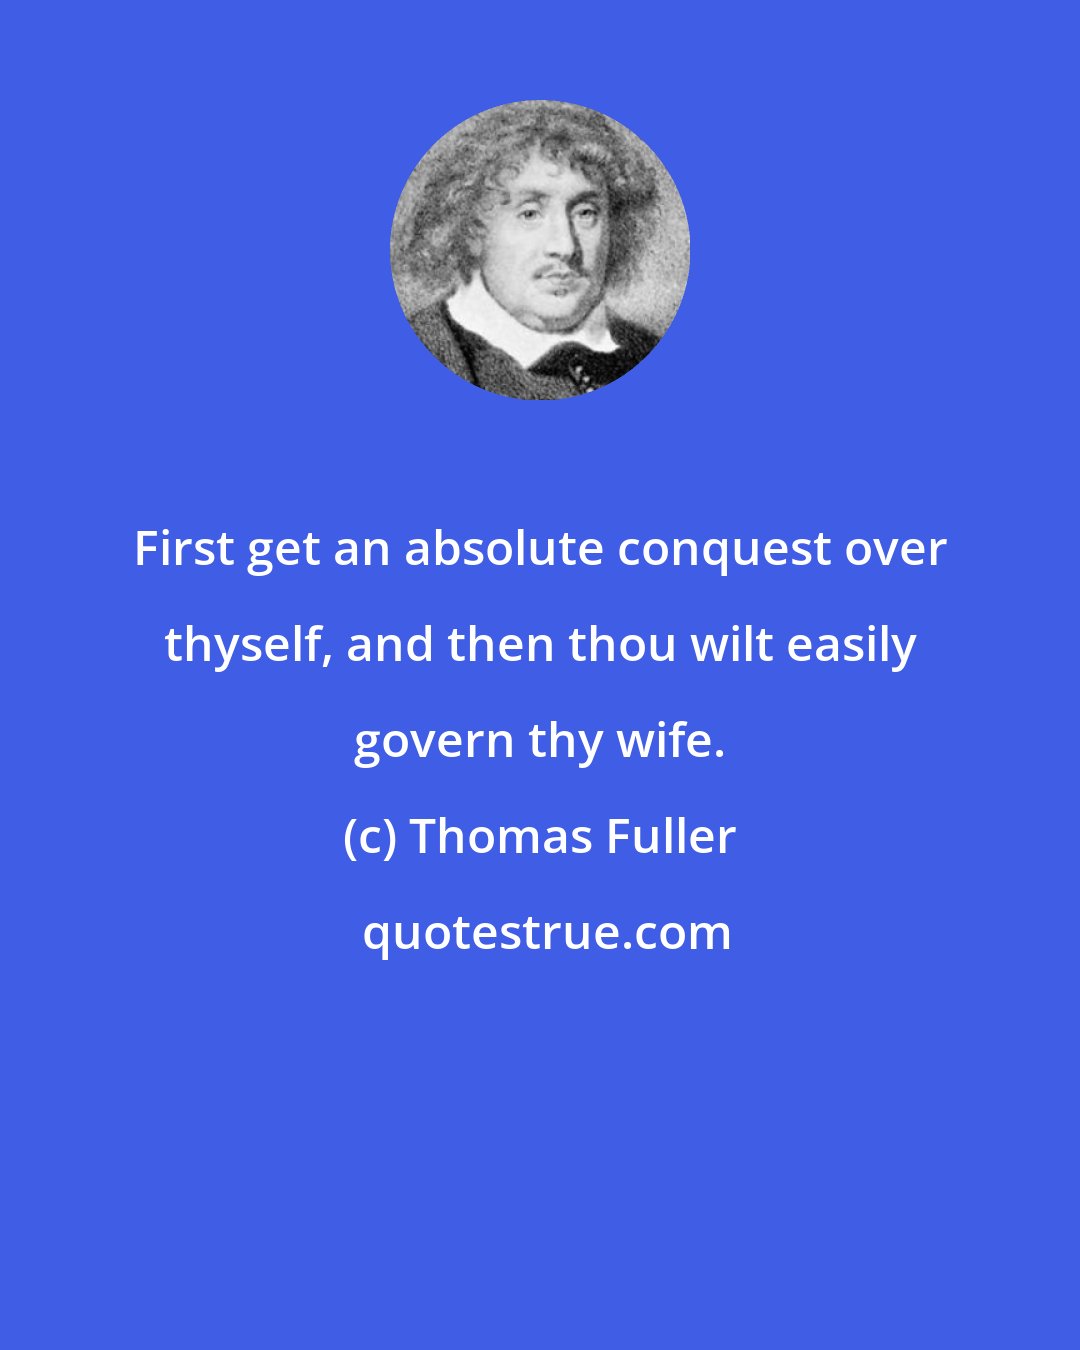 Thomas Fuller: First get an absolute conquest over thyself, and then thou wilt easily govern thy wife.